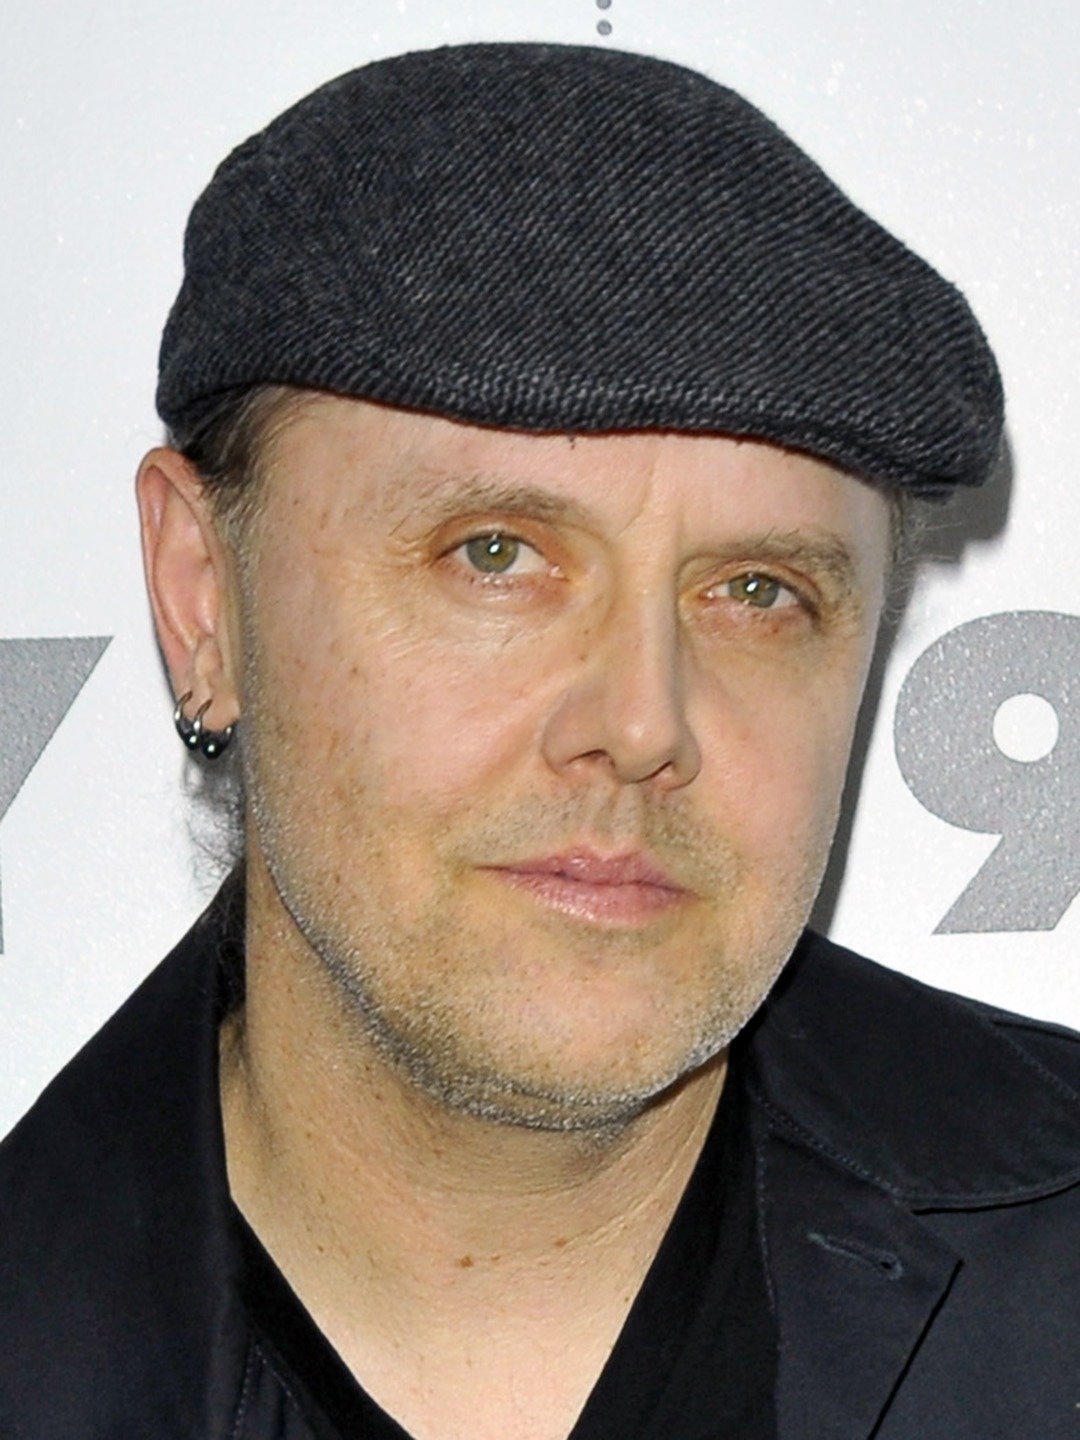 How tall is Lars Ulrich?